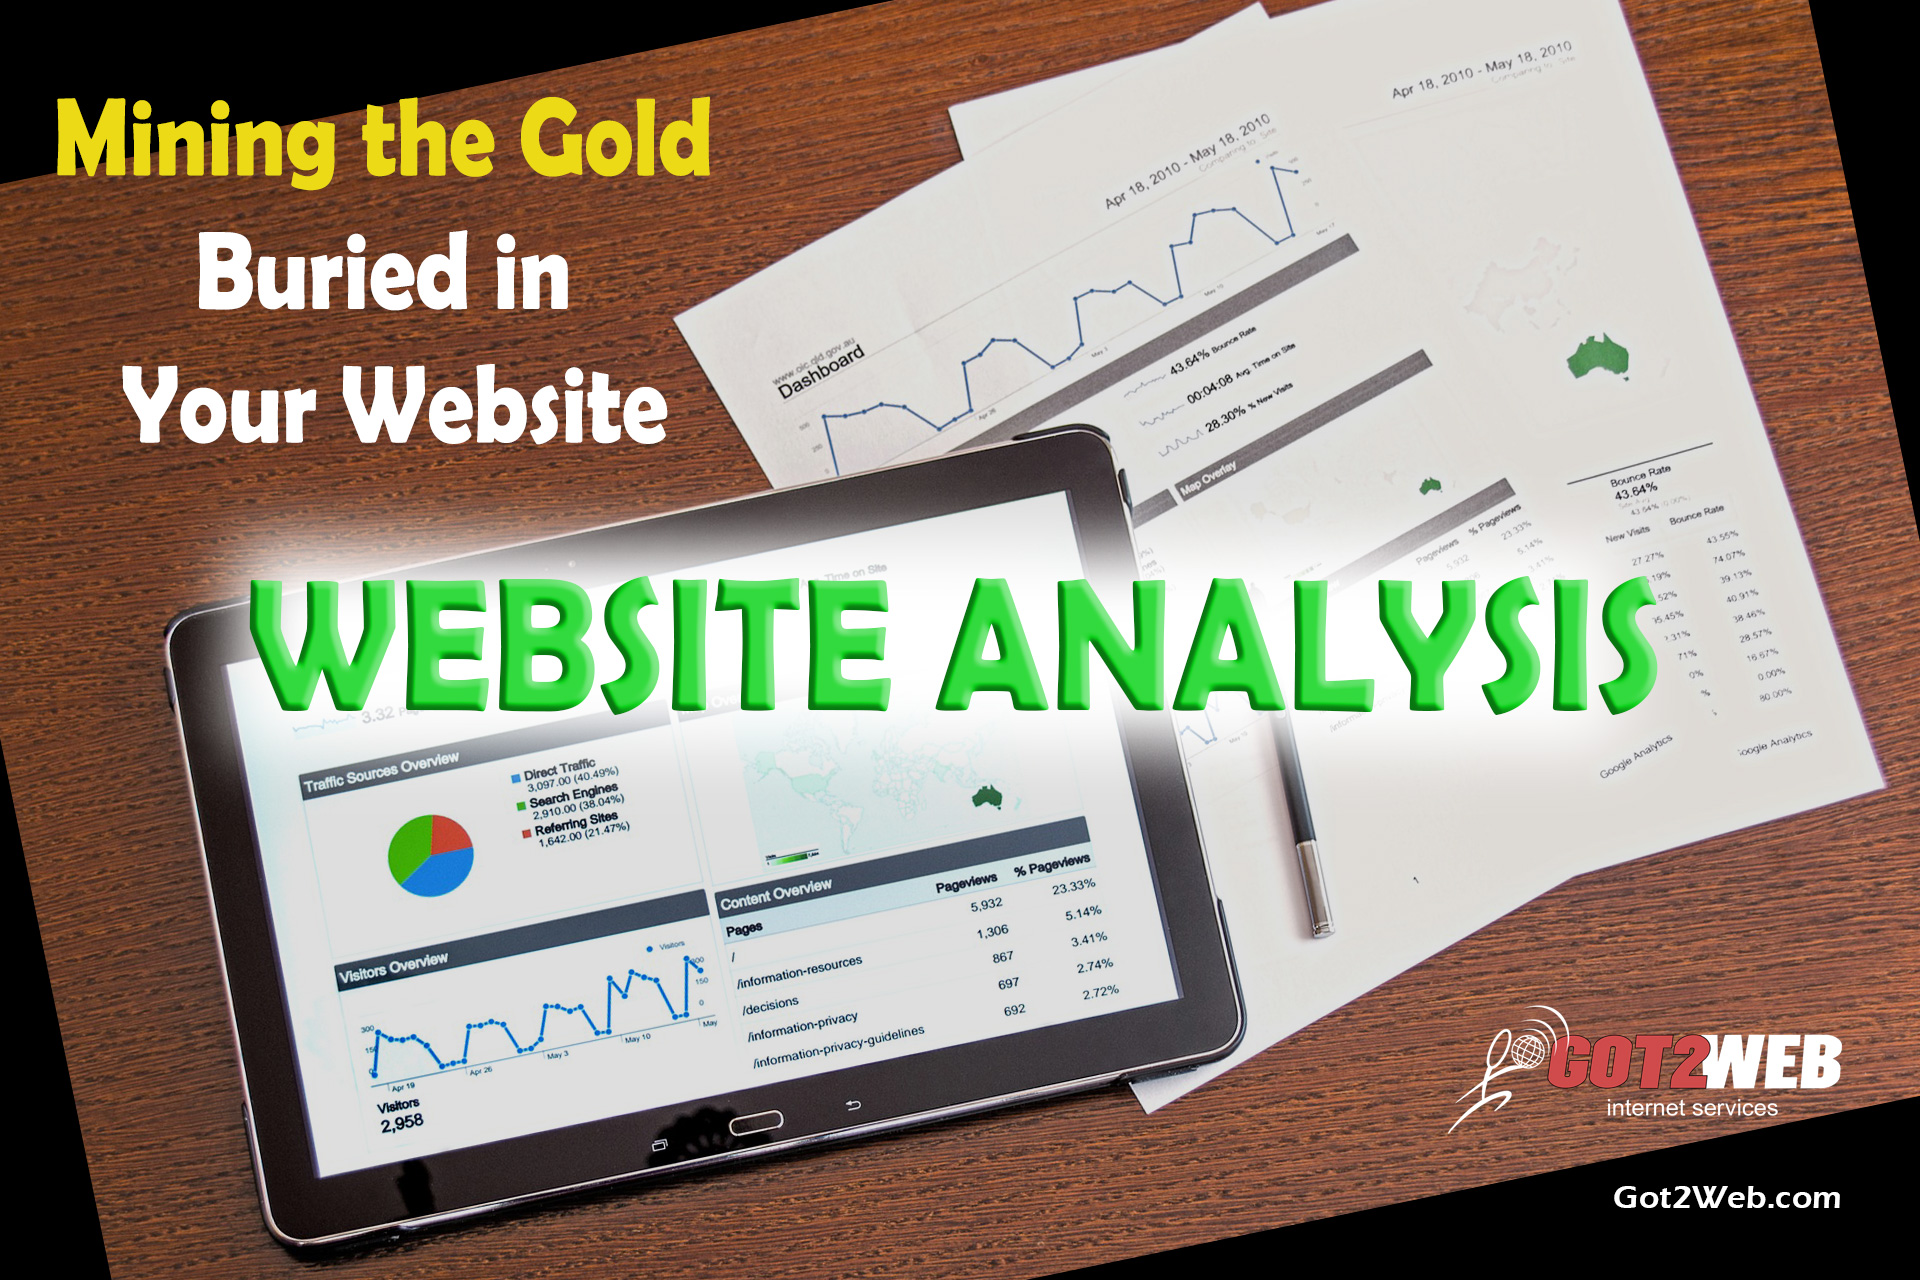 value of website analysis reports for your businss